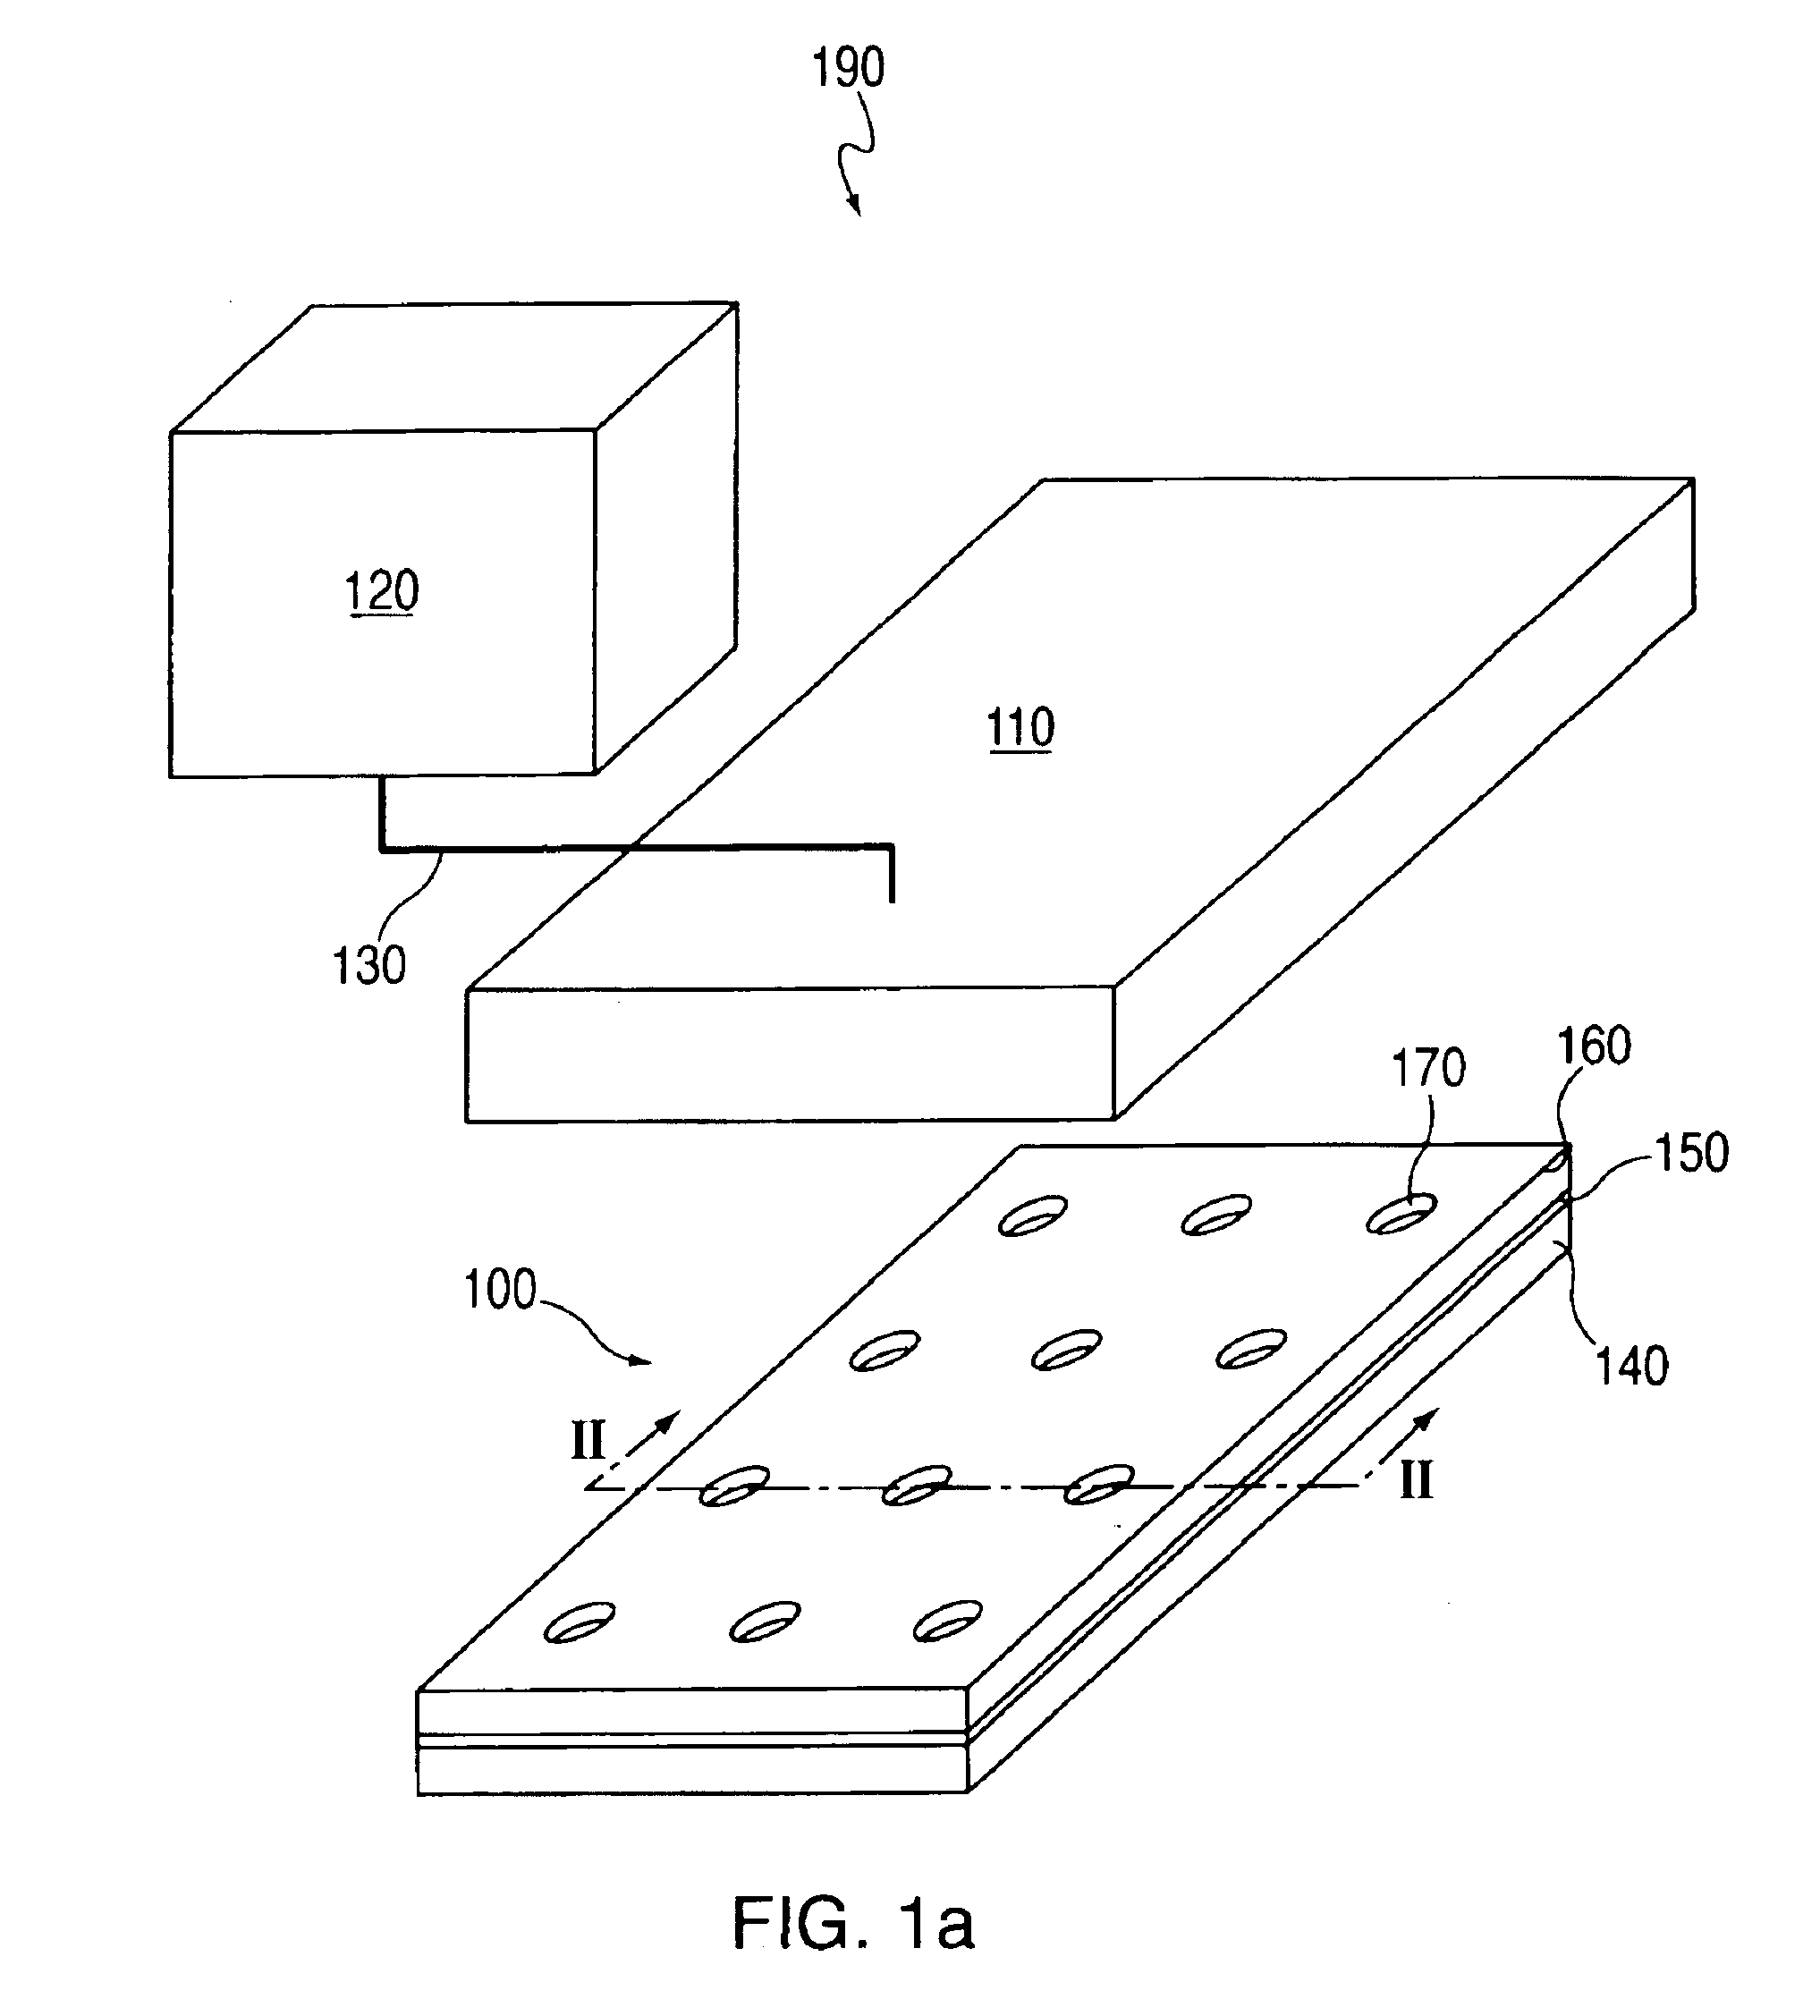 Device for monitoring cell motility in real-time